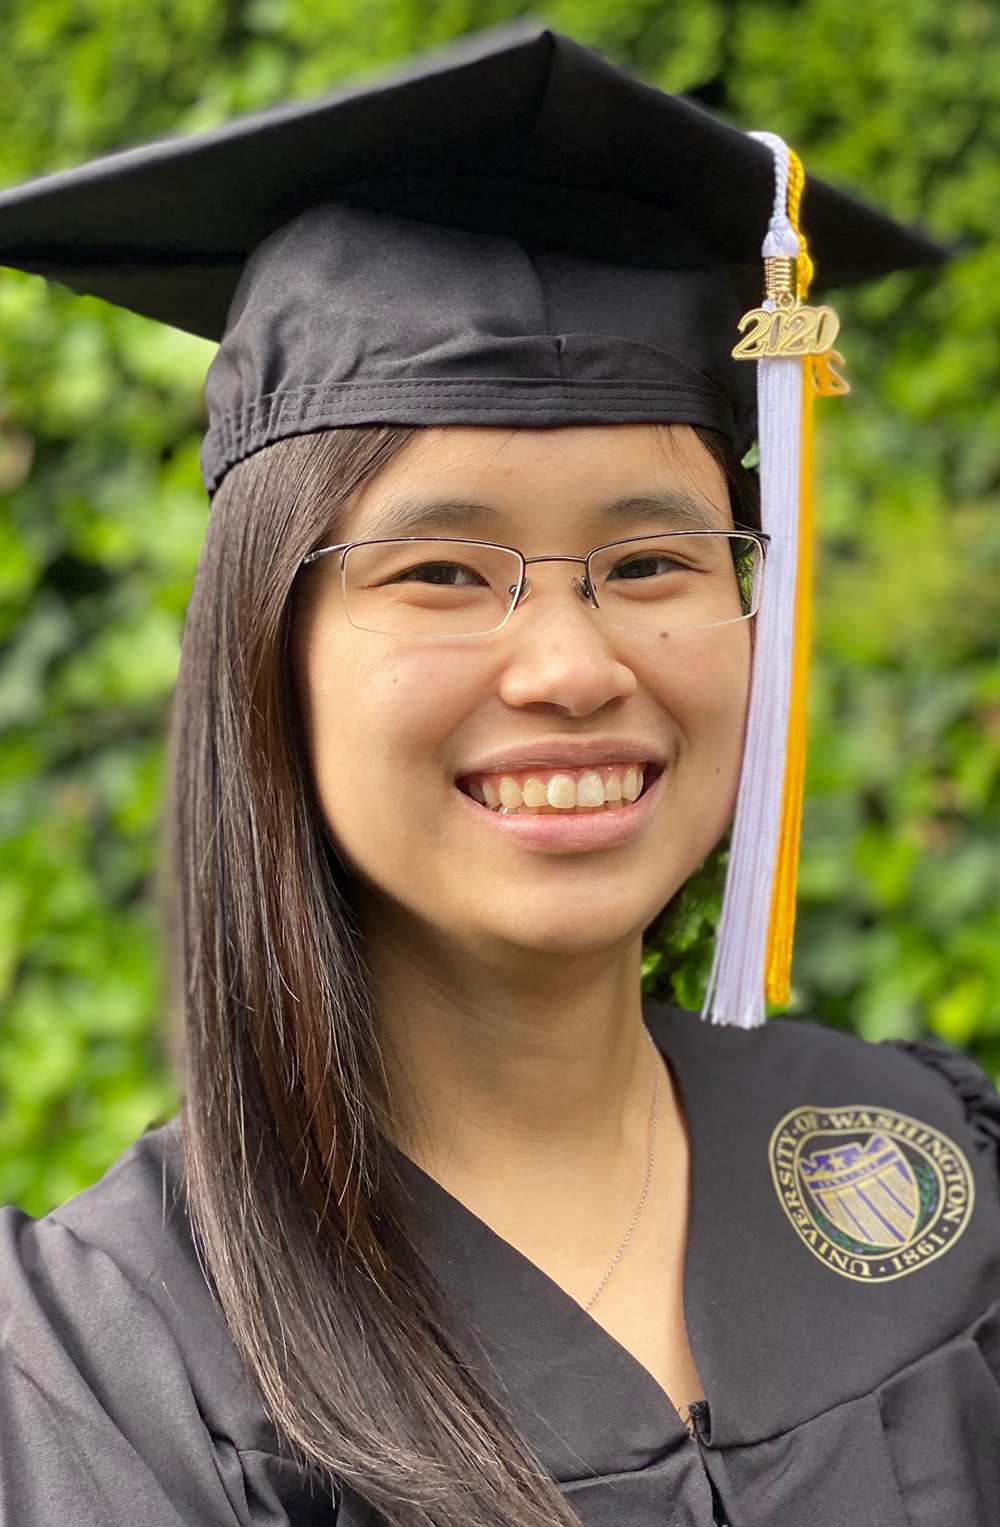 Portrait of Grace Dy, smiling, wearing a black graduation robe a cap with white and gold tassels, with green ivy visible in the background